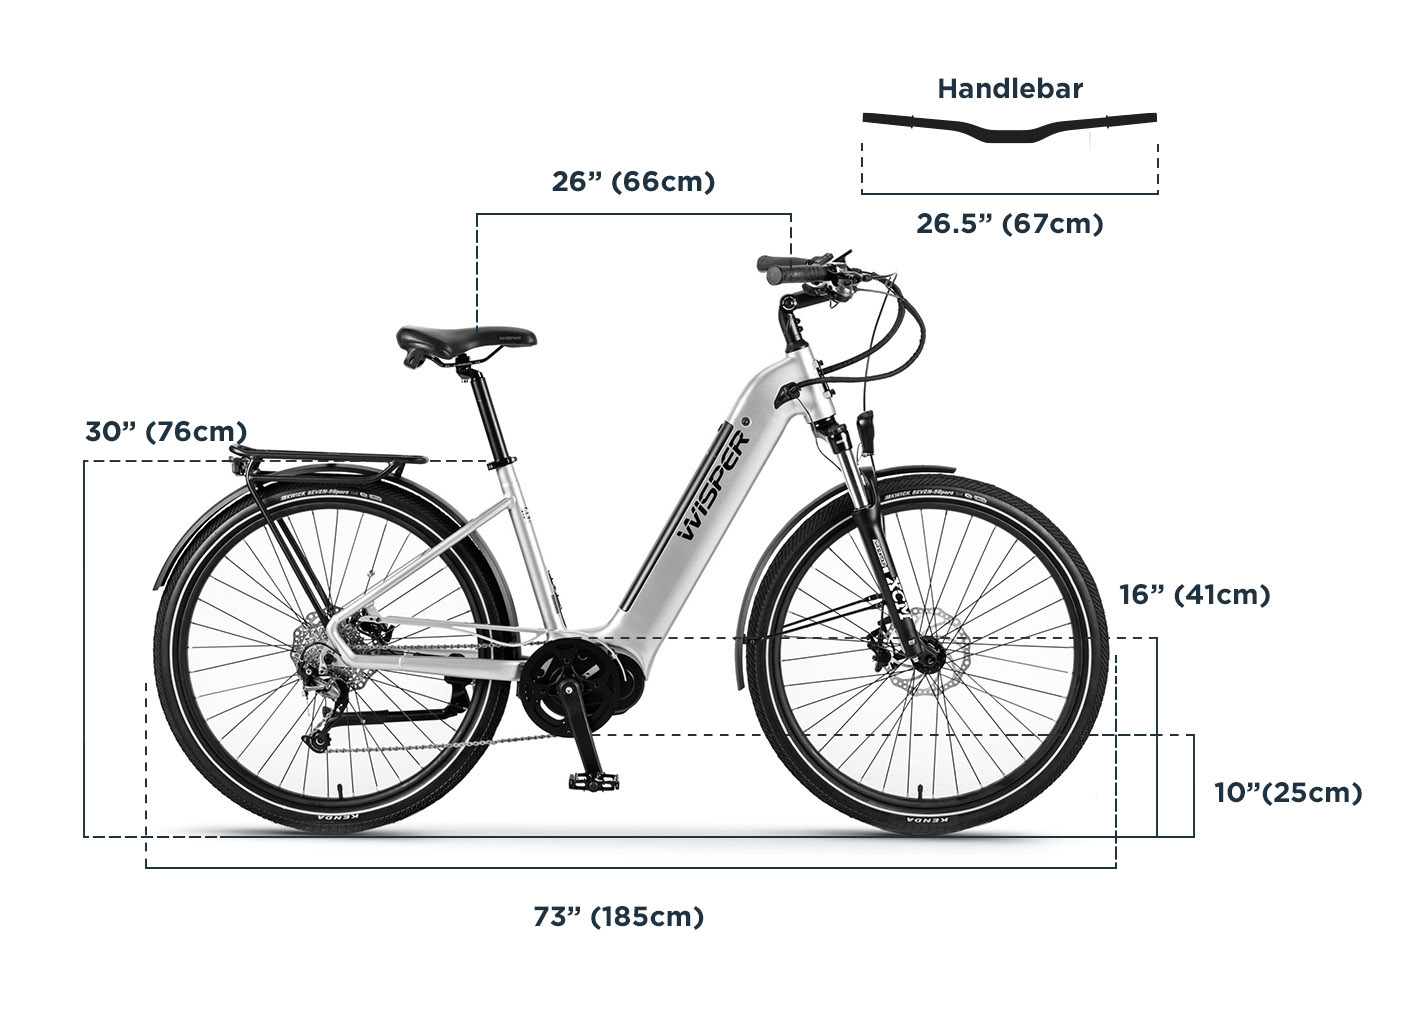 step-through electric bike sizing and dimentions